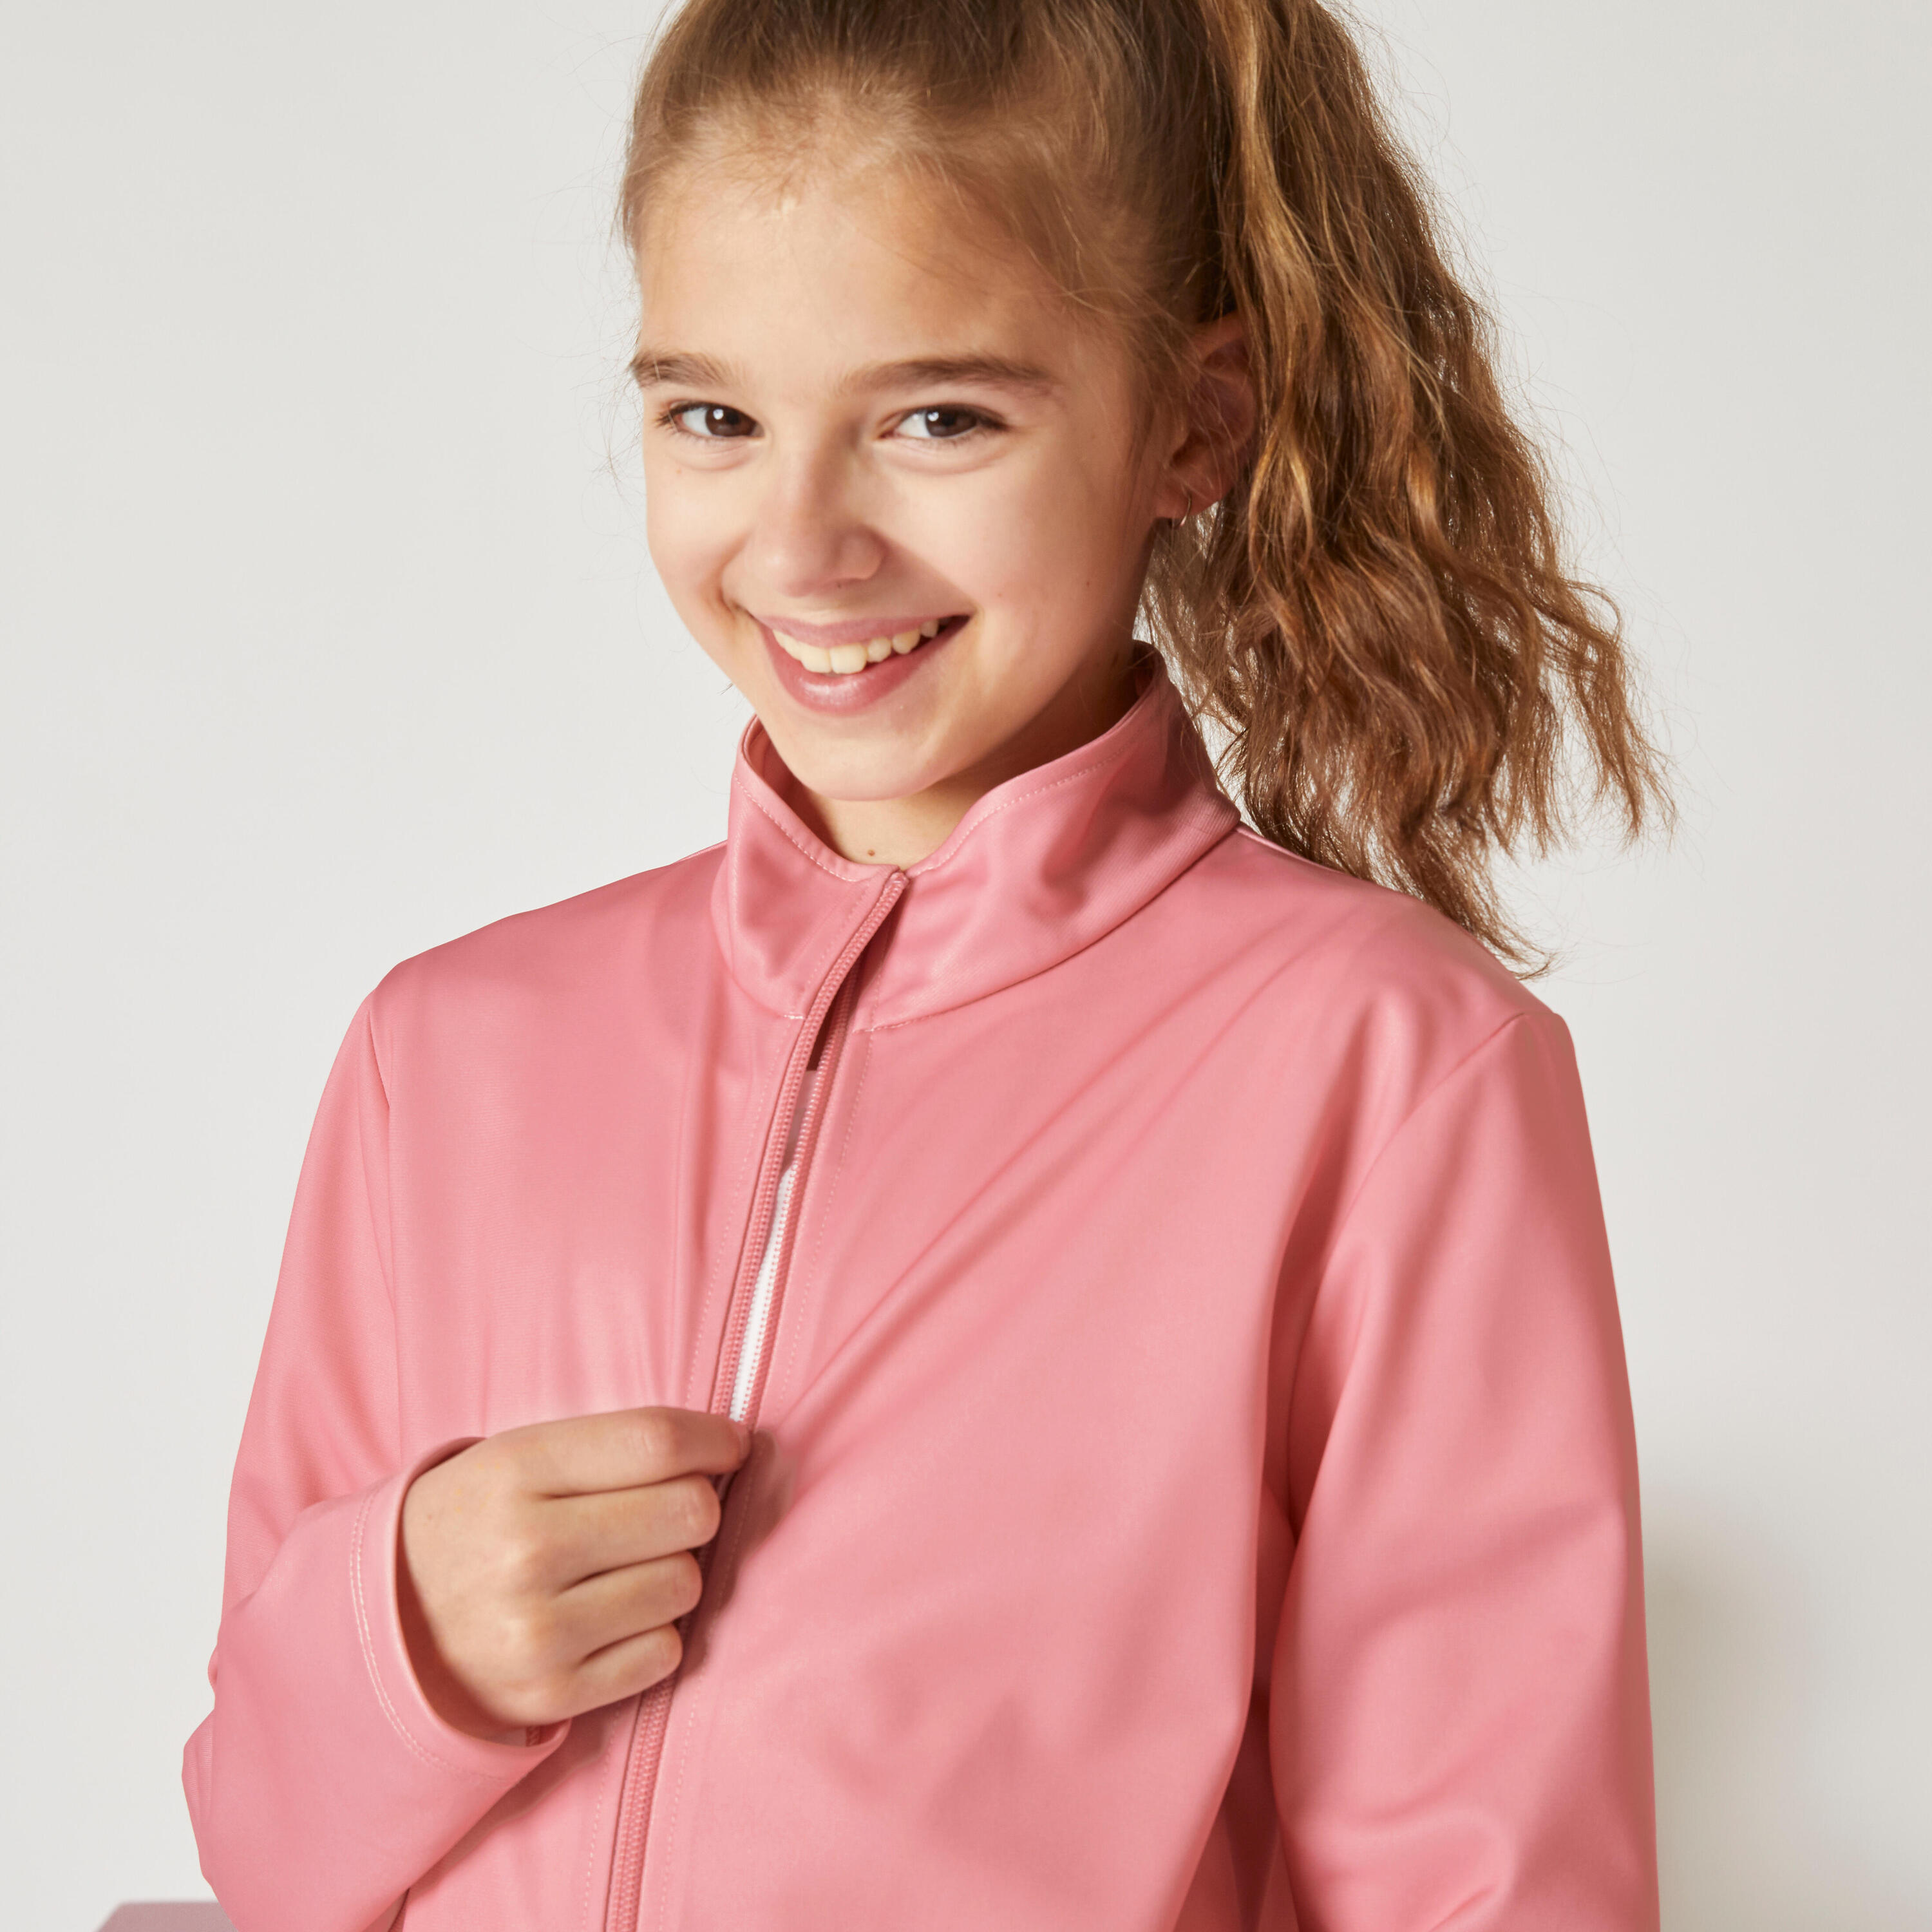 Kids' Breathable Synthetic Tracksuit Gym'y - Pink Top/Navy Bottoms 4/5